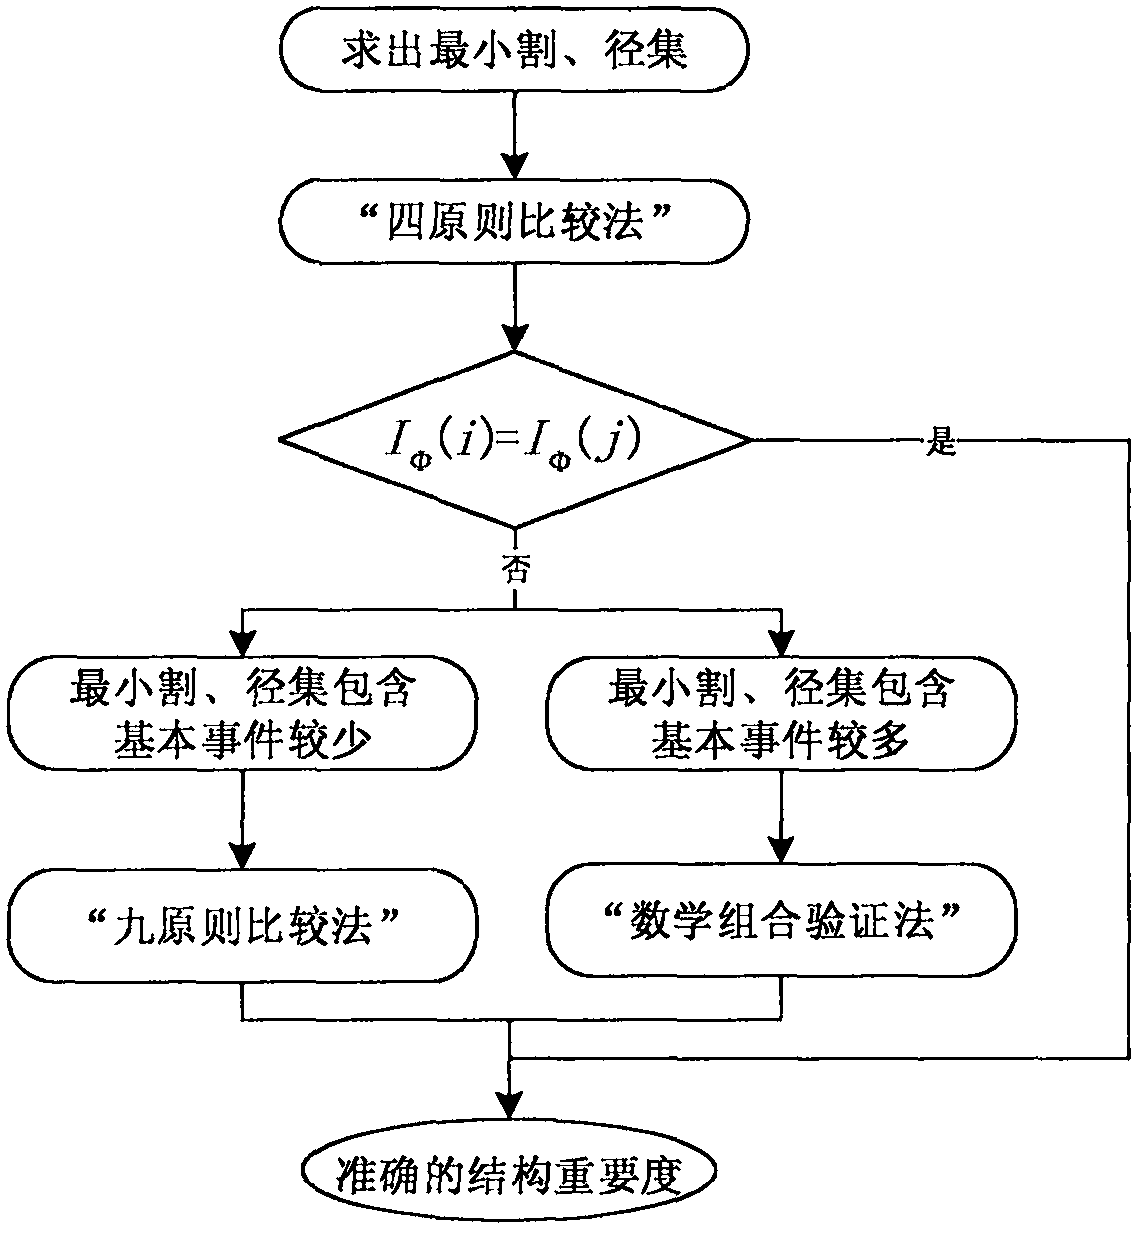 Method for solving structure importance degree of improved fault tree